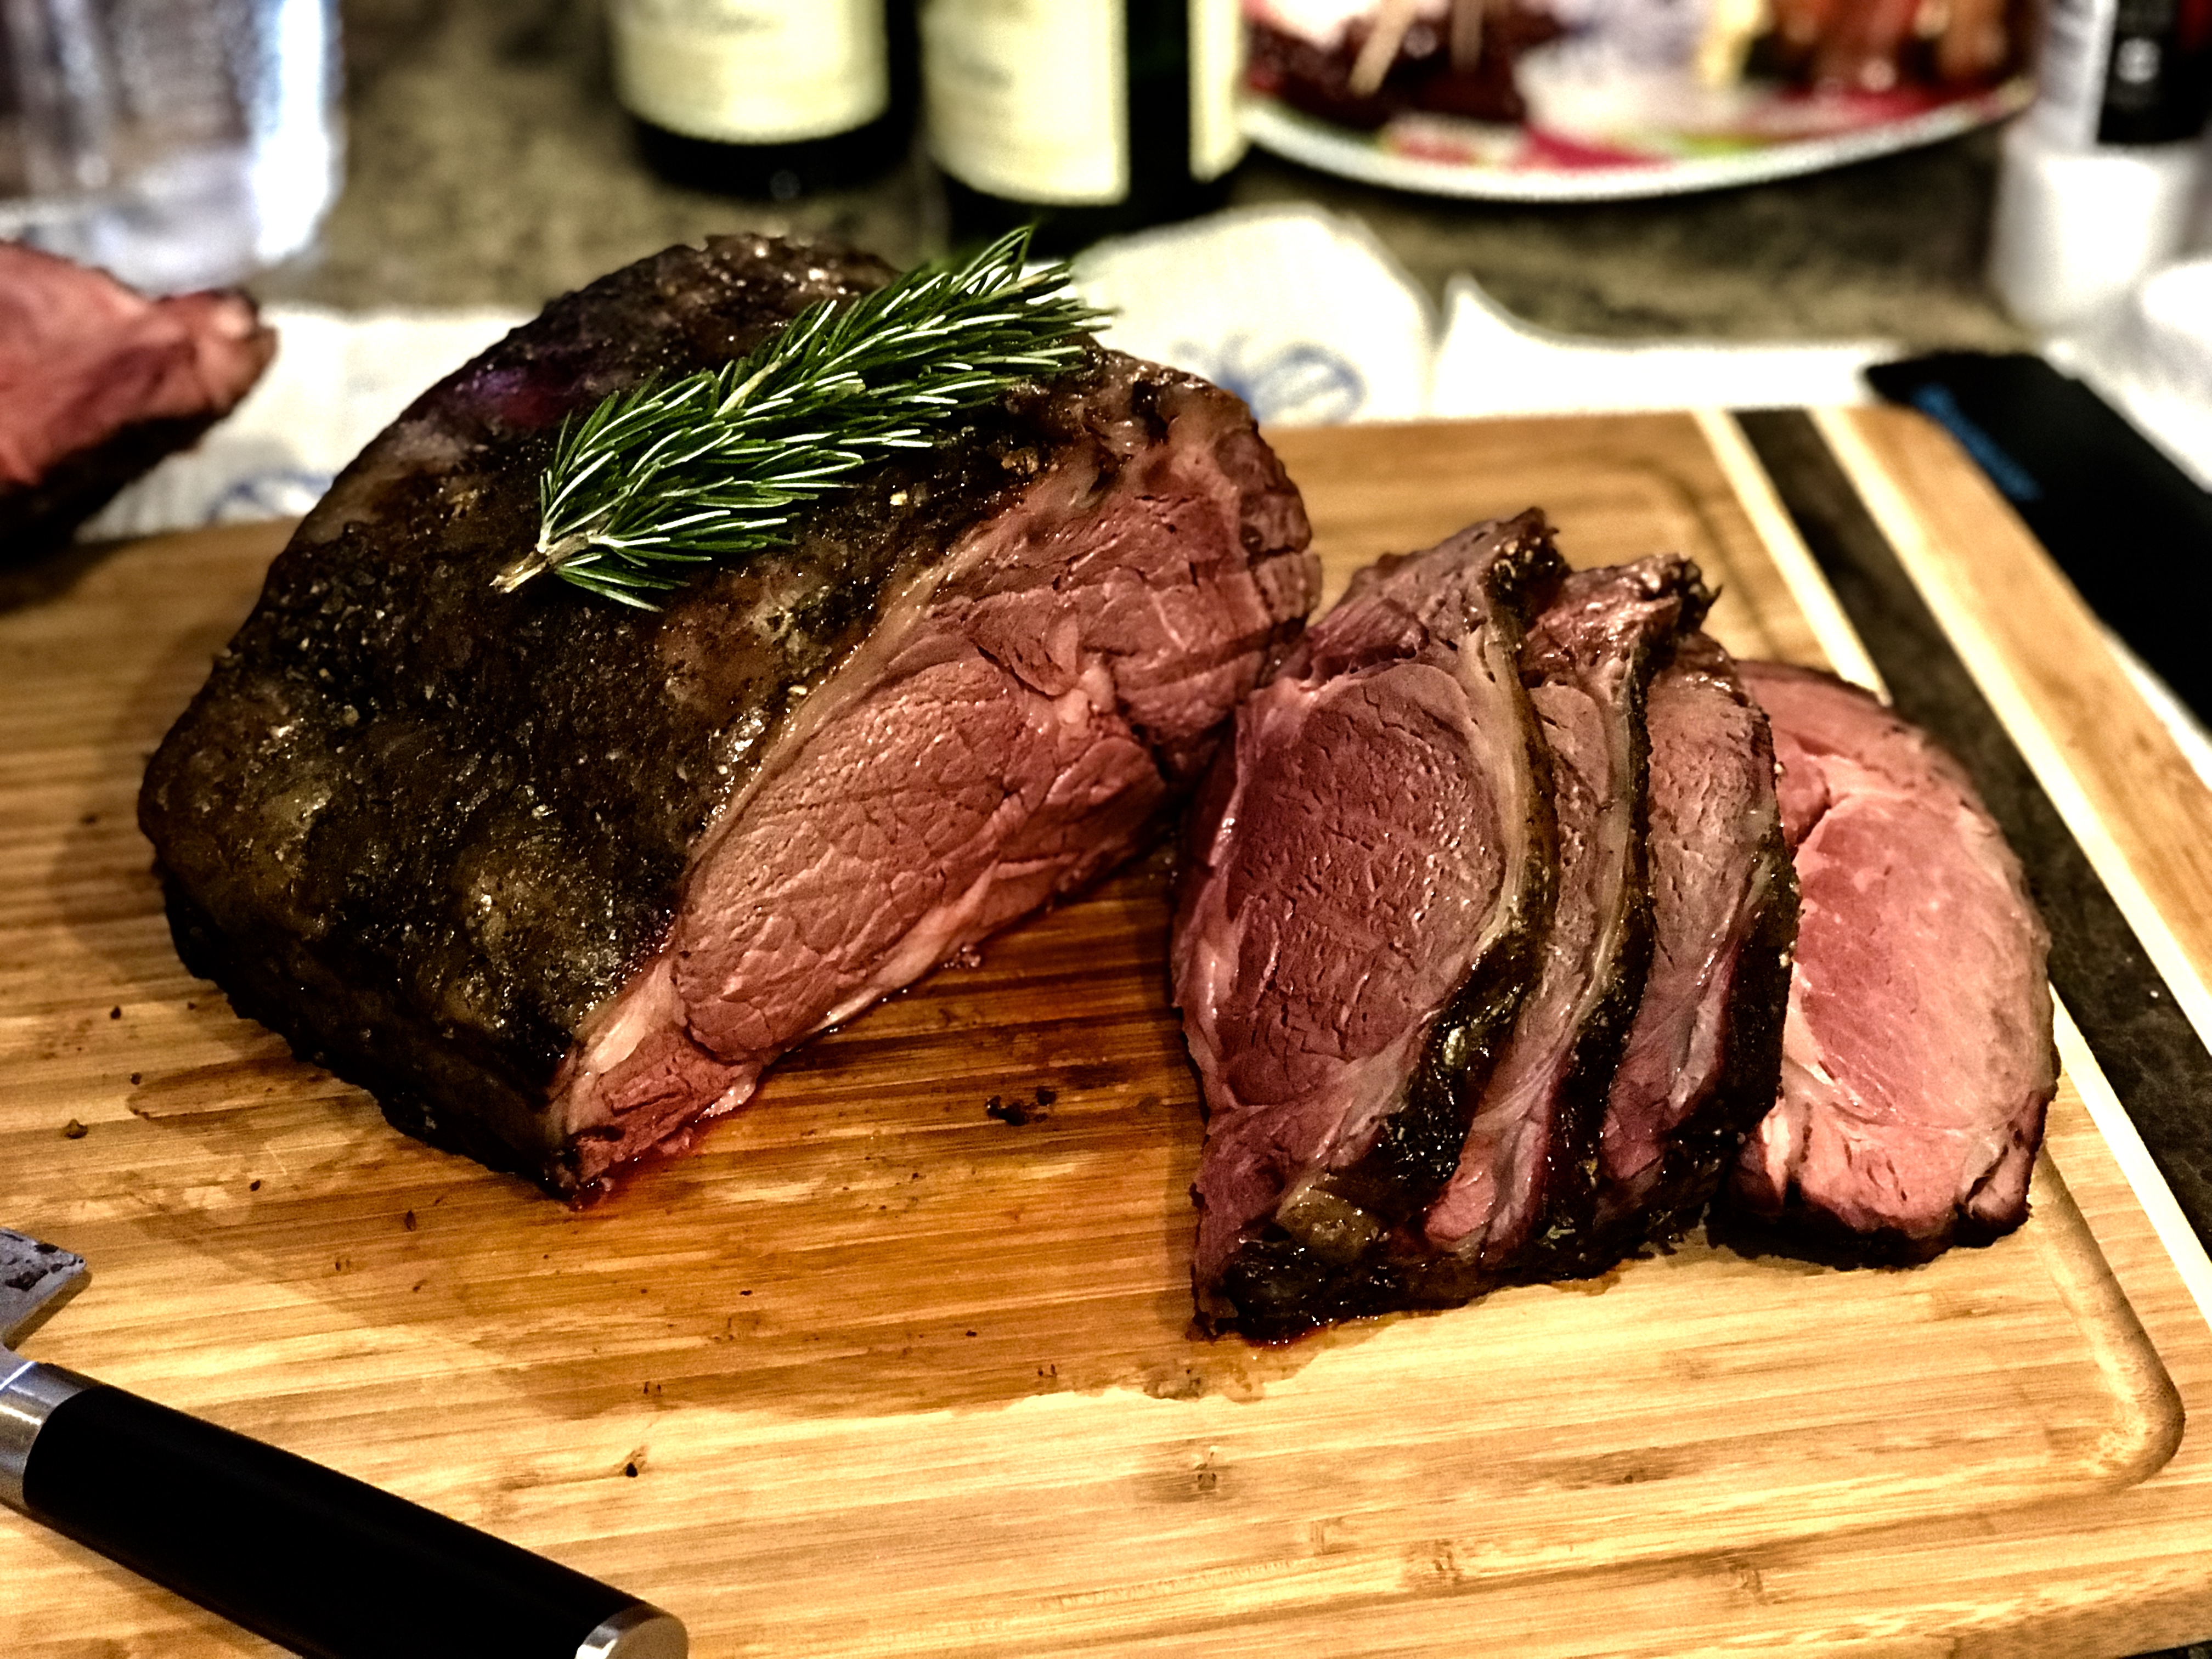 Herb Butter Smoked Prime Rib Your Go To Prime Rib Recipe Slowpoke Cooking,Grape Leaves